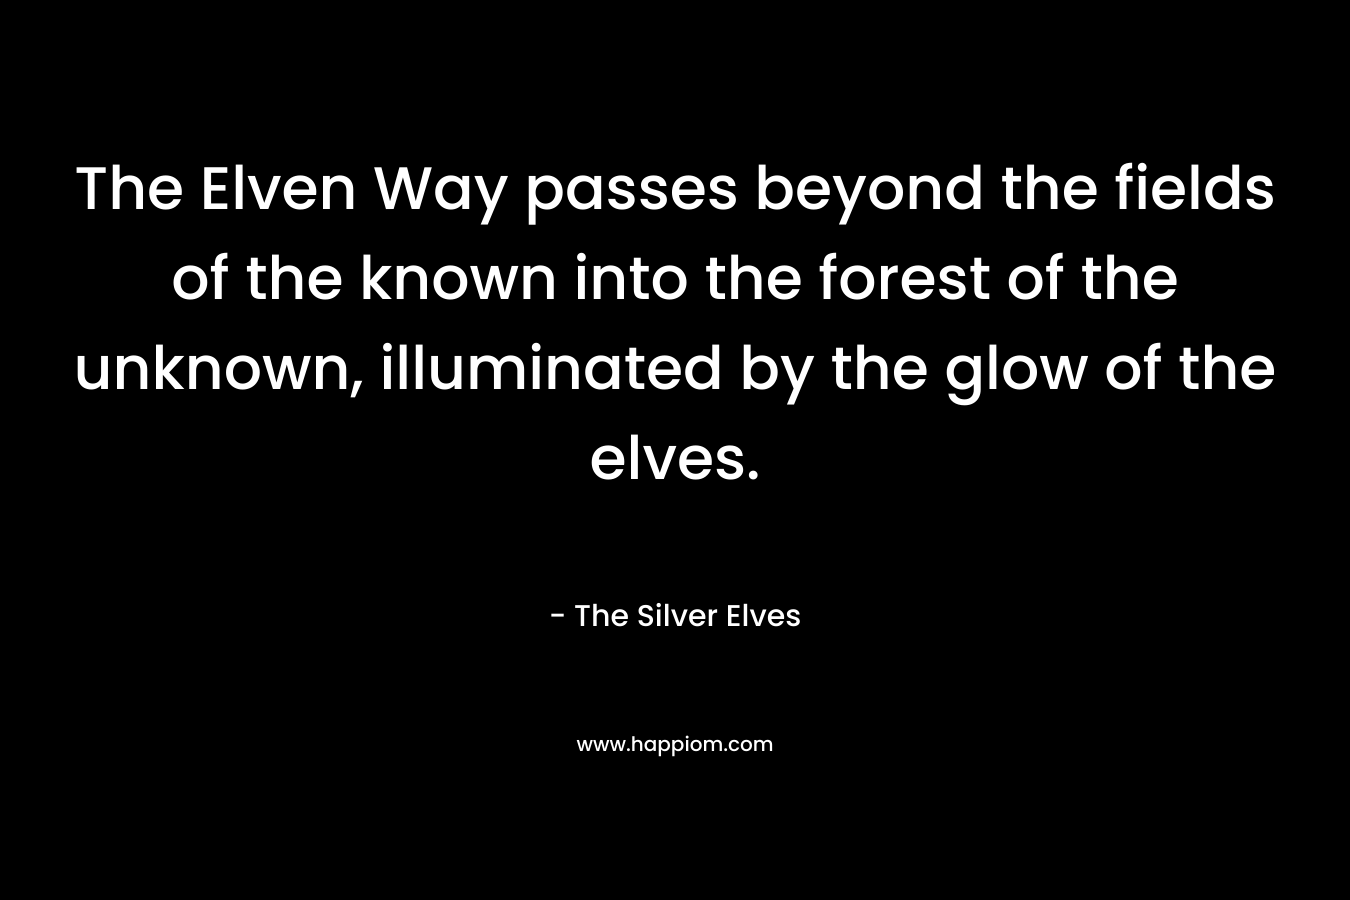 The Elven Way passes beyond the fields of the known into the forest of the unknown, illuminated by the glow of the elves. – The Silver Elves